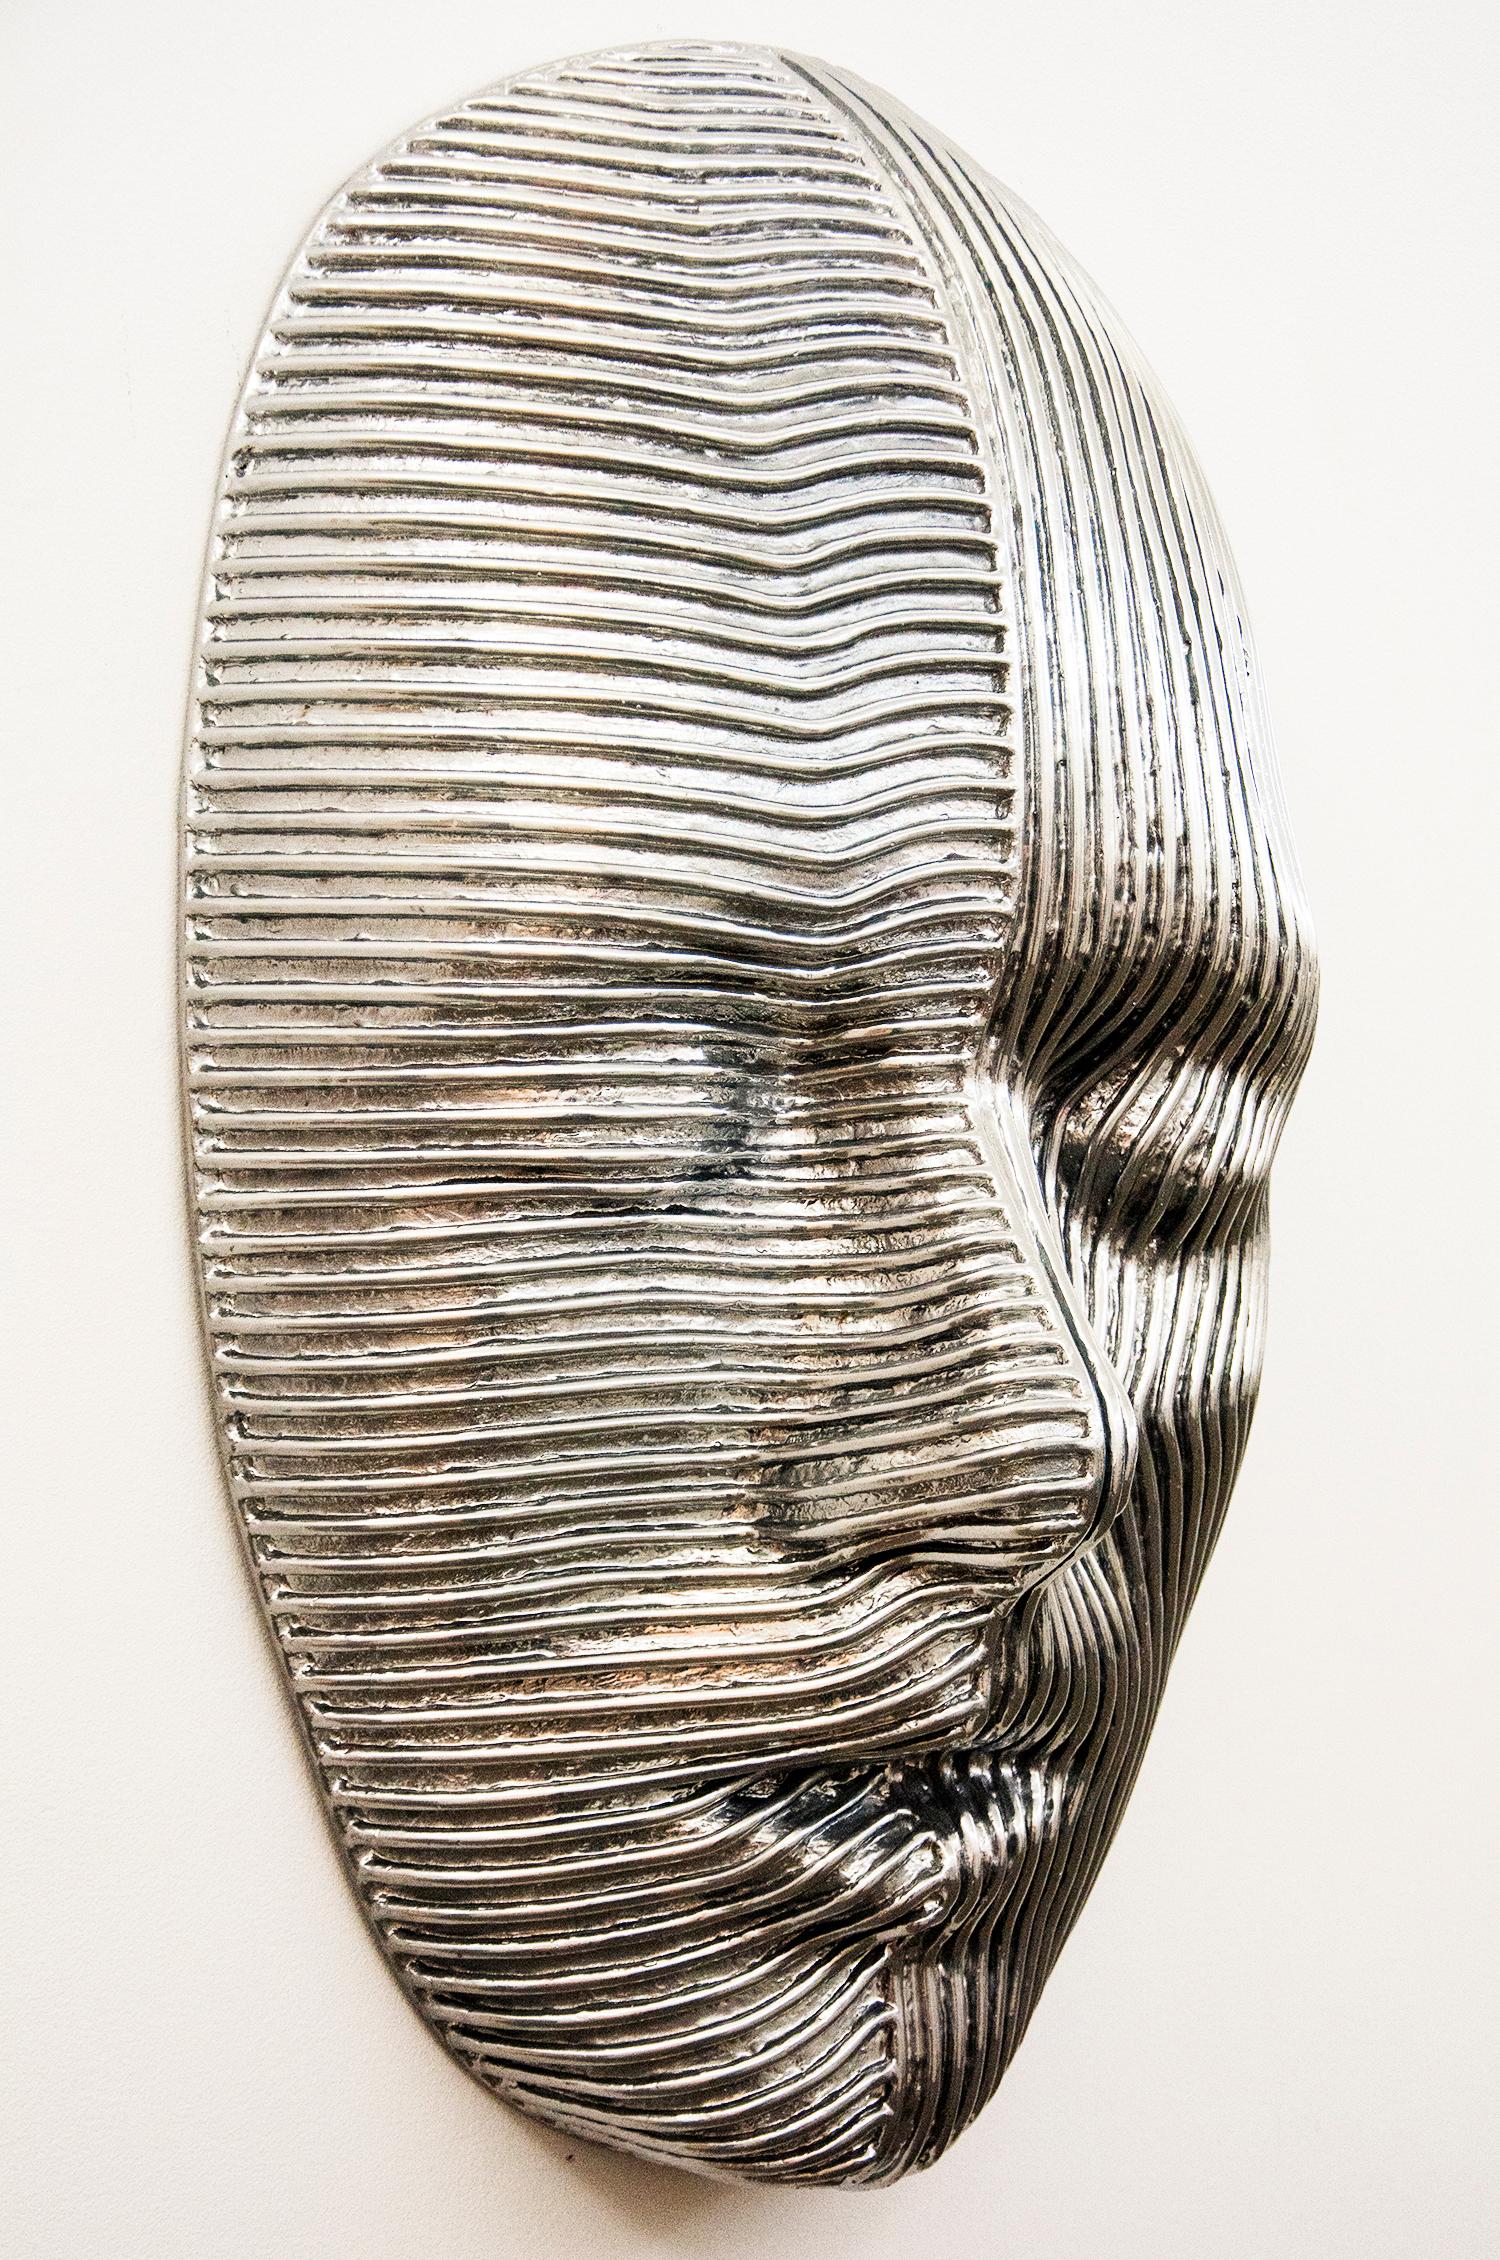 Dichotomy - Large Polished Aluminum Wall Sculpture - Gray Figurative Sculpture by Dale Dunning